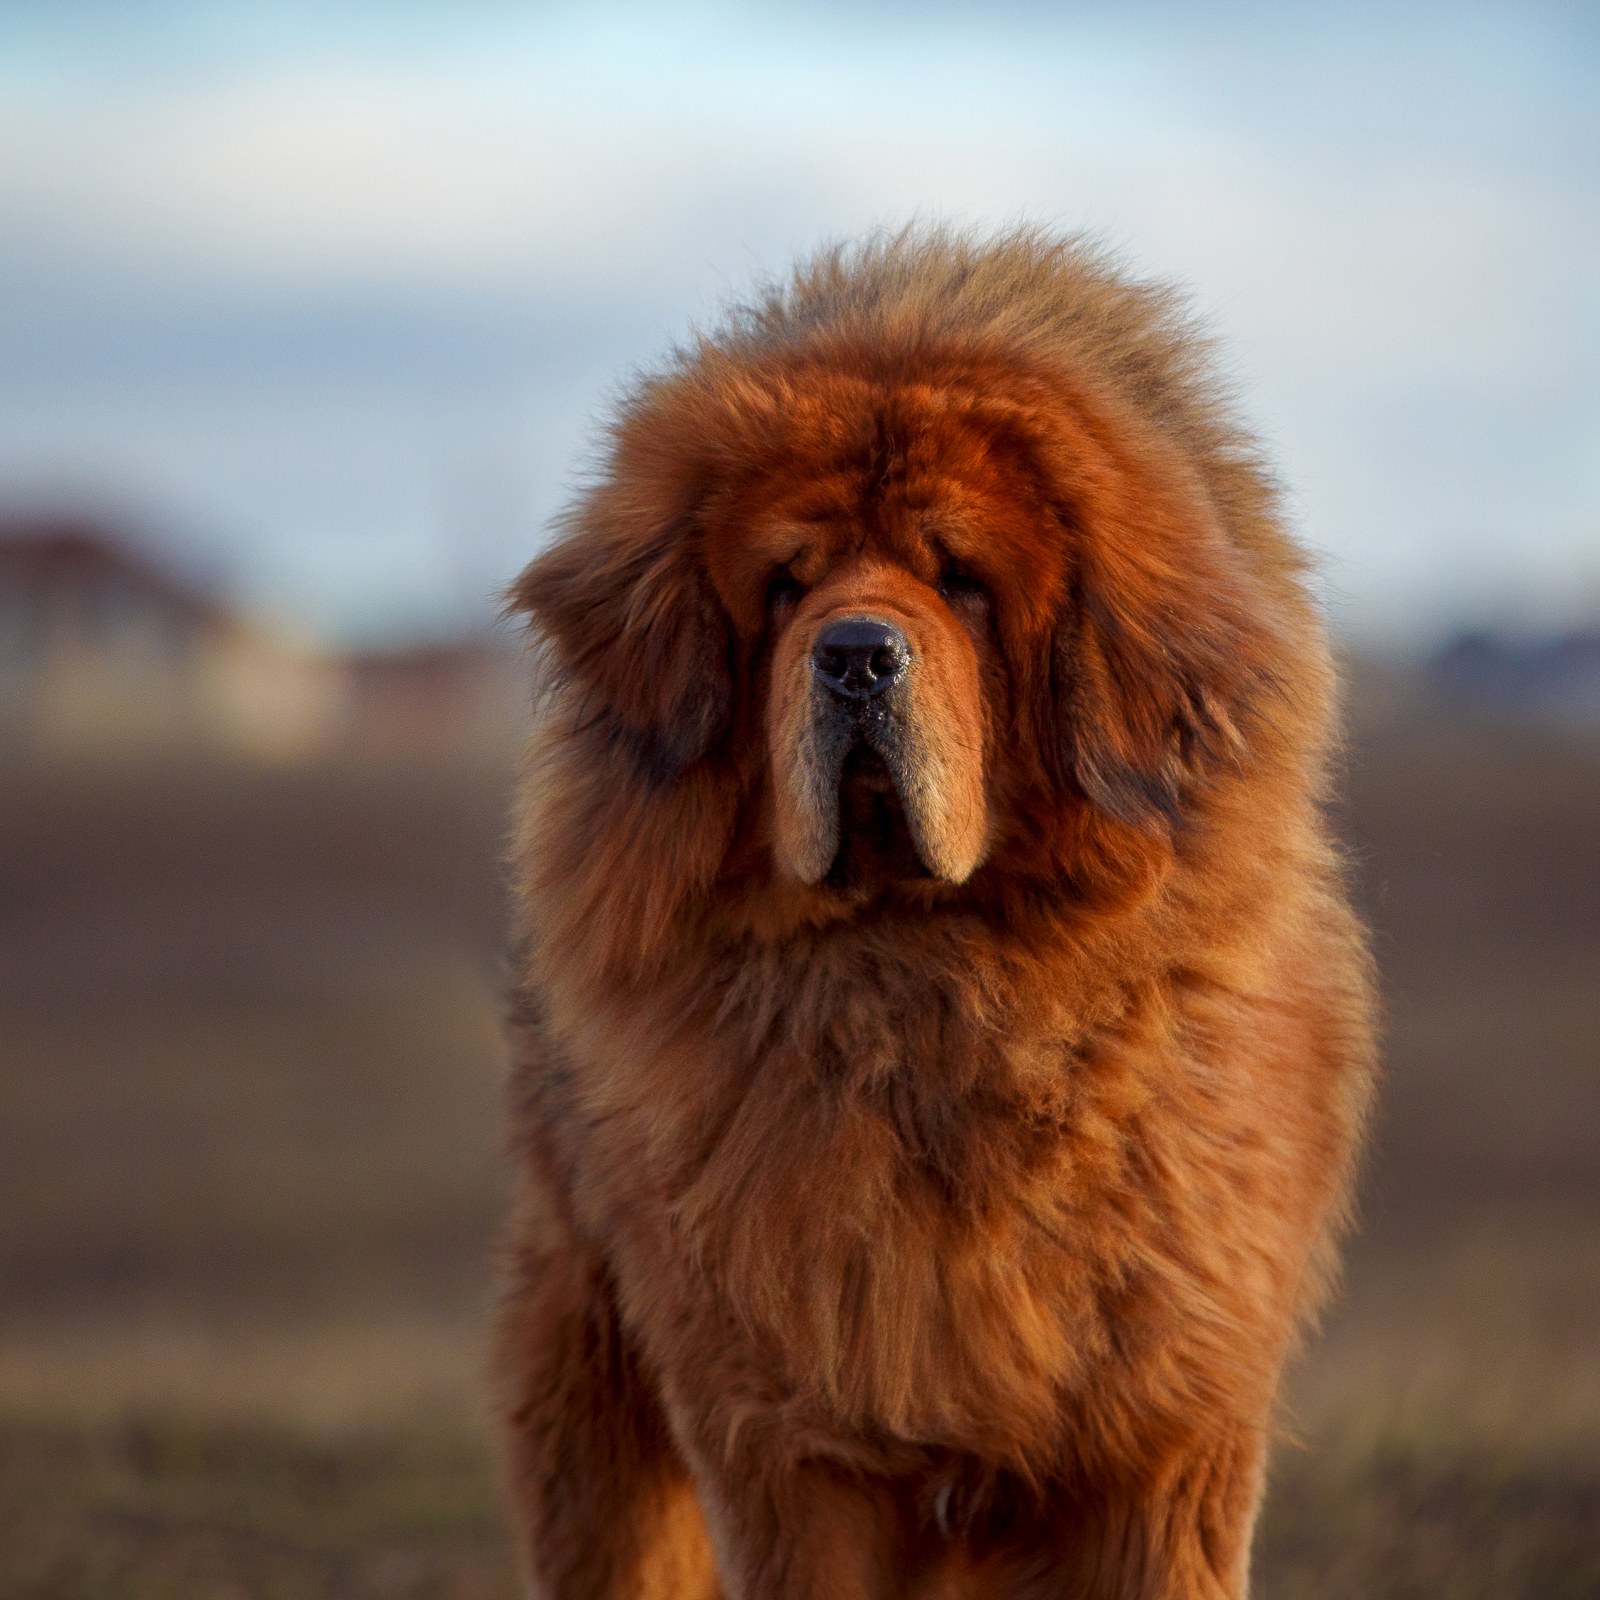 Giant Tibetan Mastiff 'As Big As a Bear' Goes Viral Trying to Get Into Car